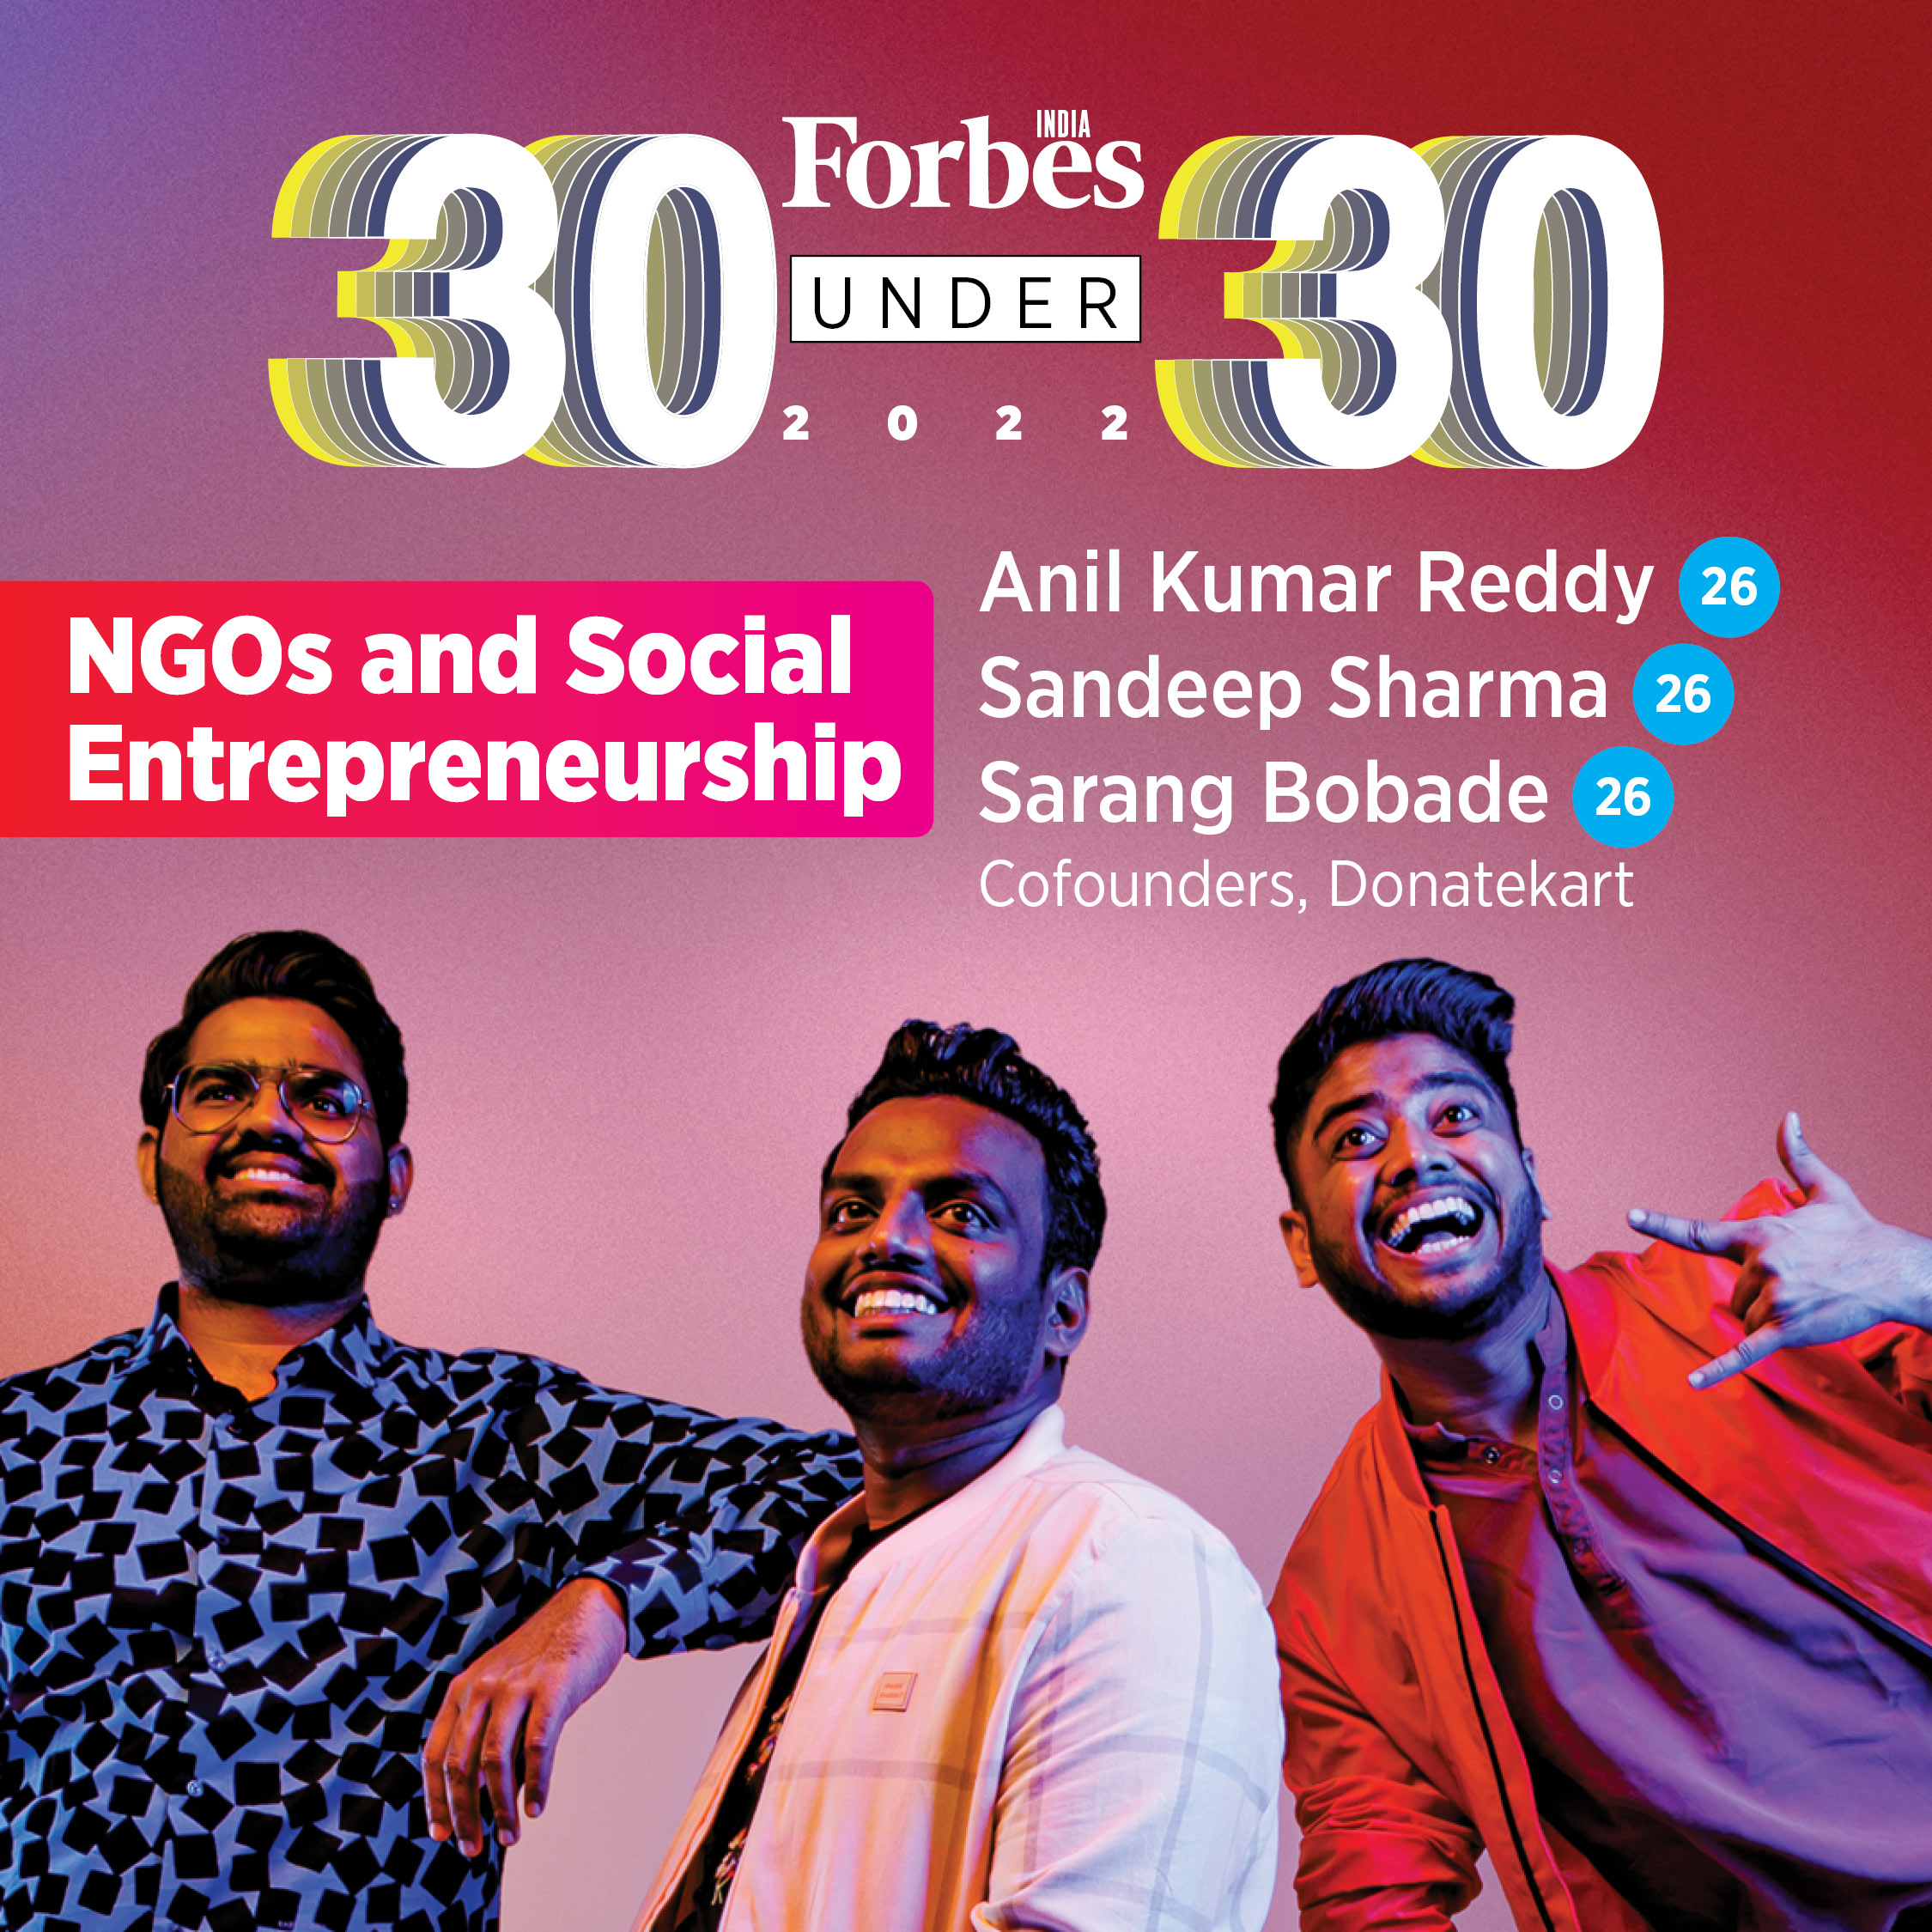 Forbes 30 Under 30, 2022: Meet Indians Who the Game This Year